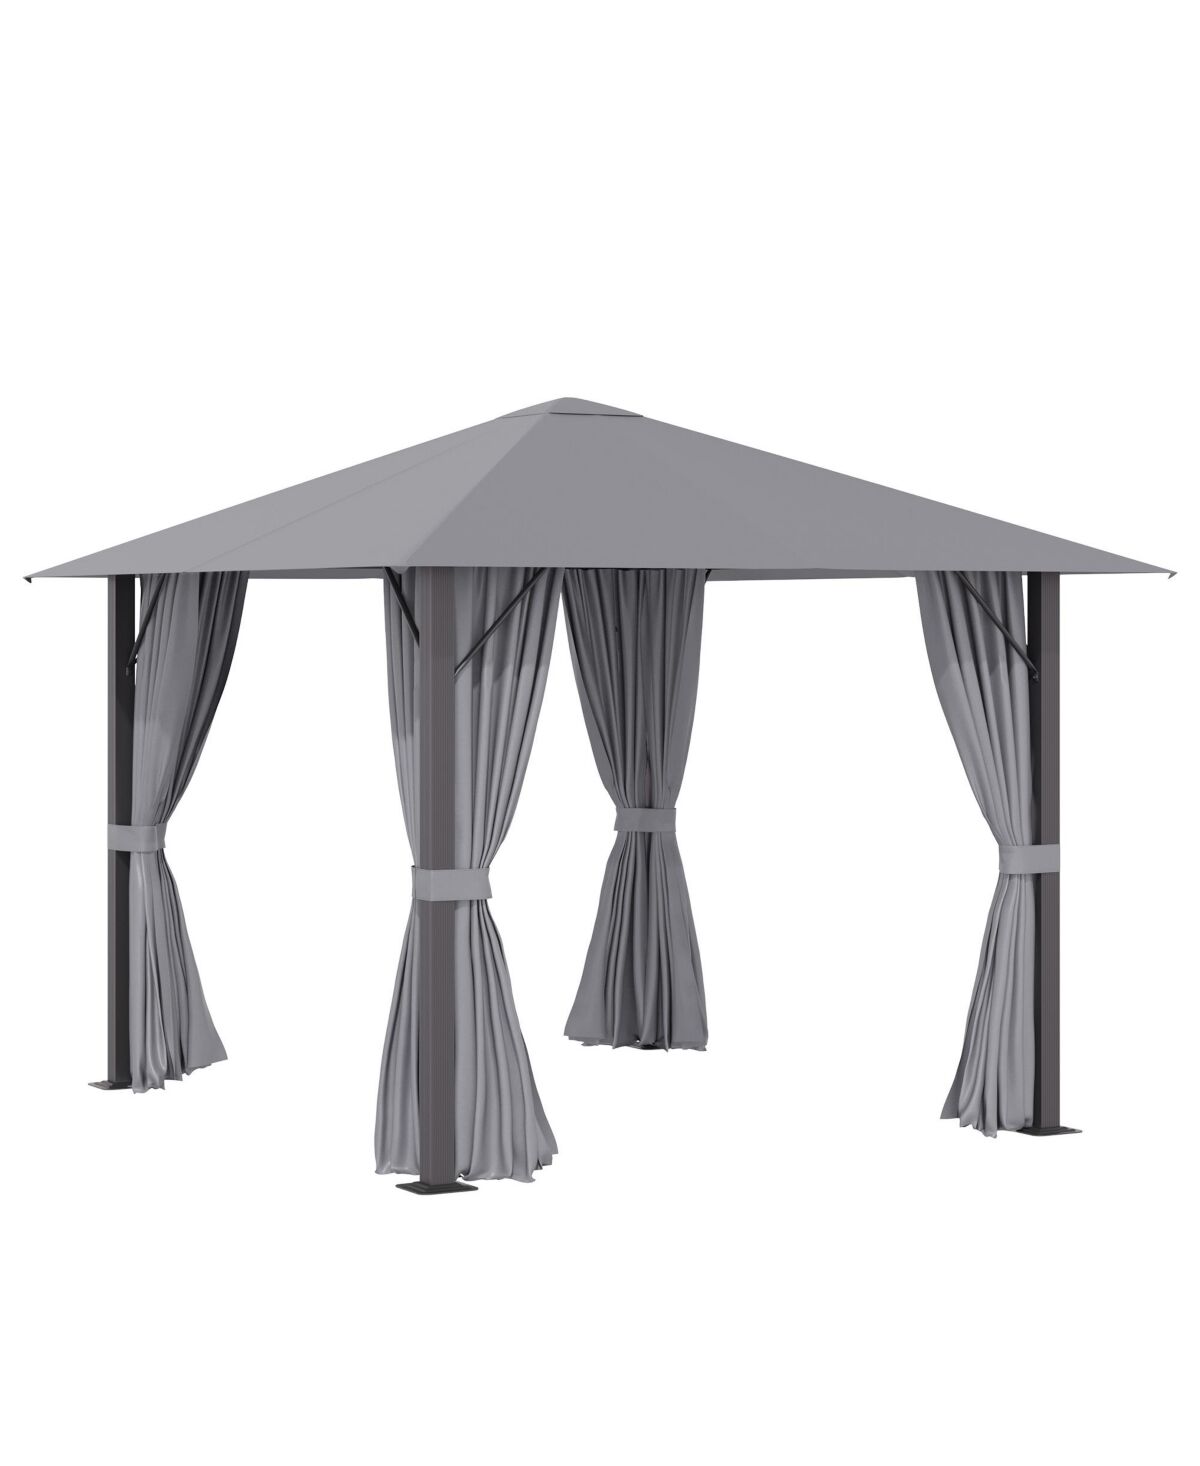 Outsunny 10' x 10' Patio Gazebo Aluminum Frame Outdoor Canopy Shelter with Sidewalls, Vented Roof for Garden, Lawn, Backyard and Deck, Grey - Grey